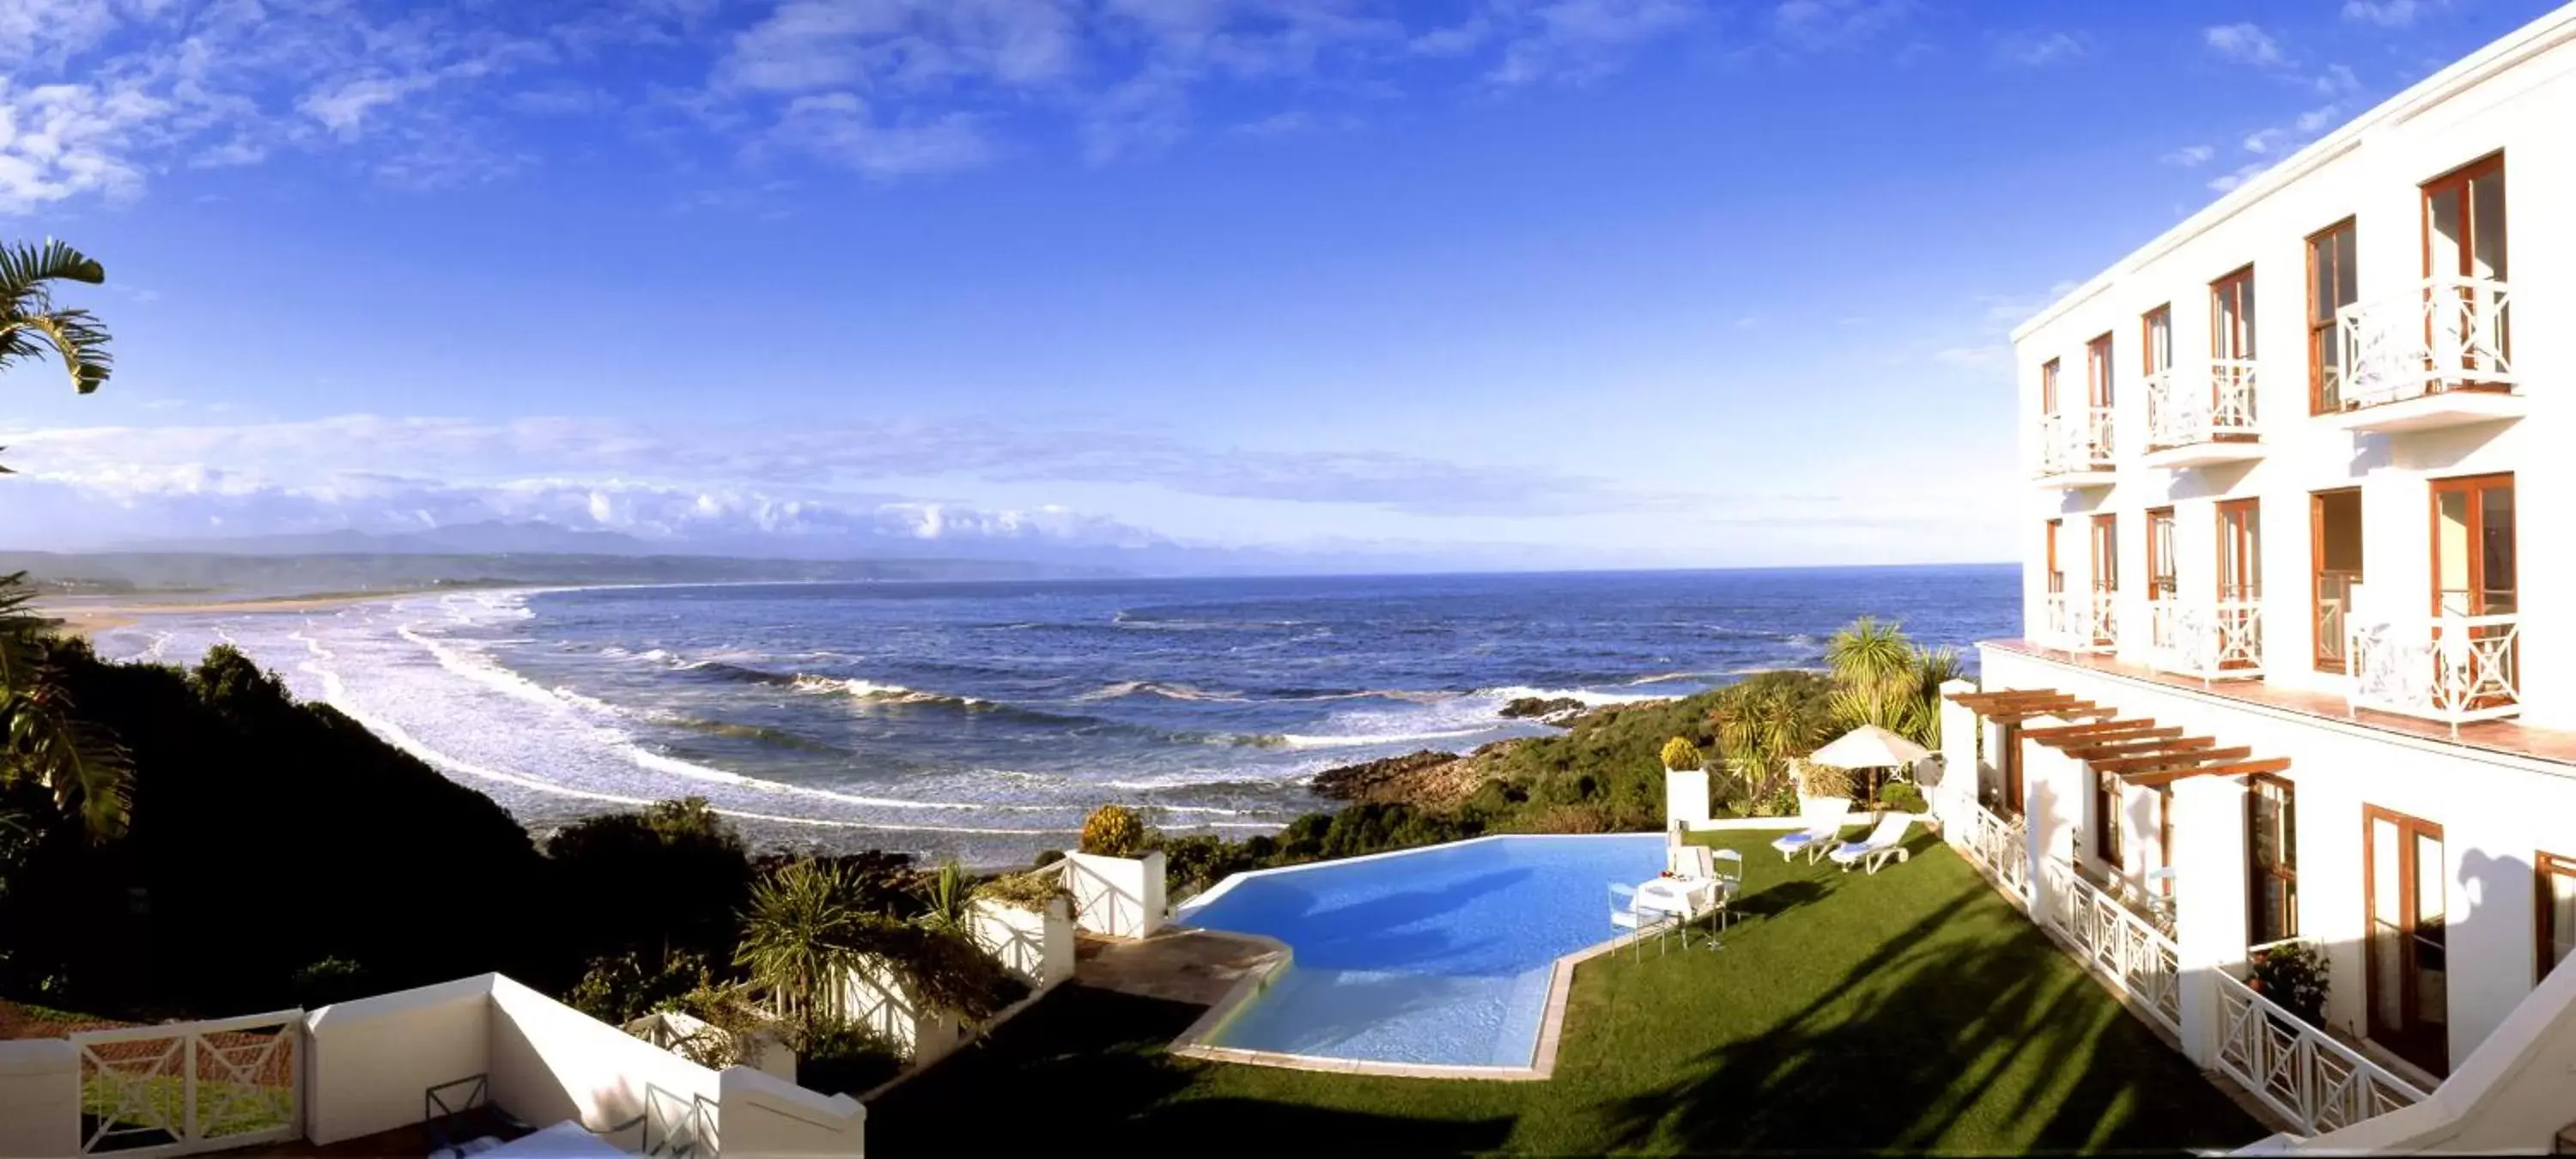 Swimming pool, Pool View in The Plettenberg Hotel